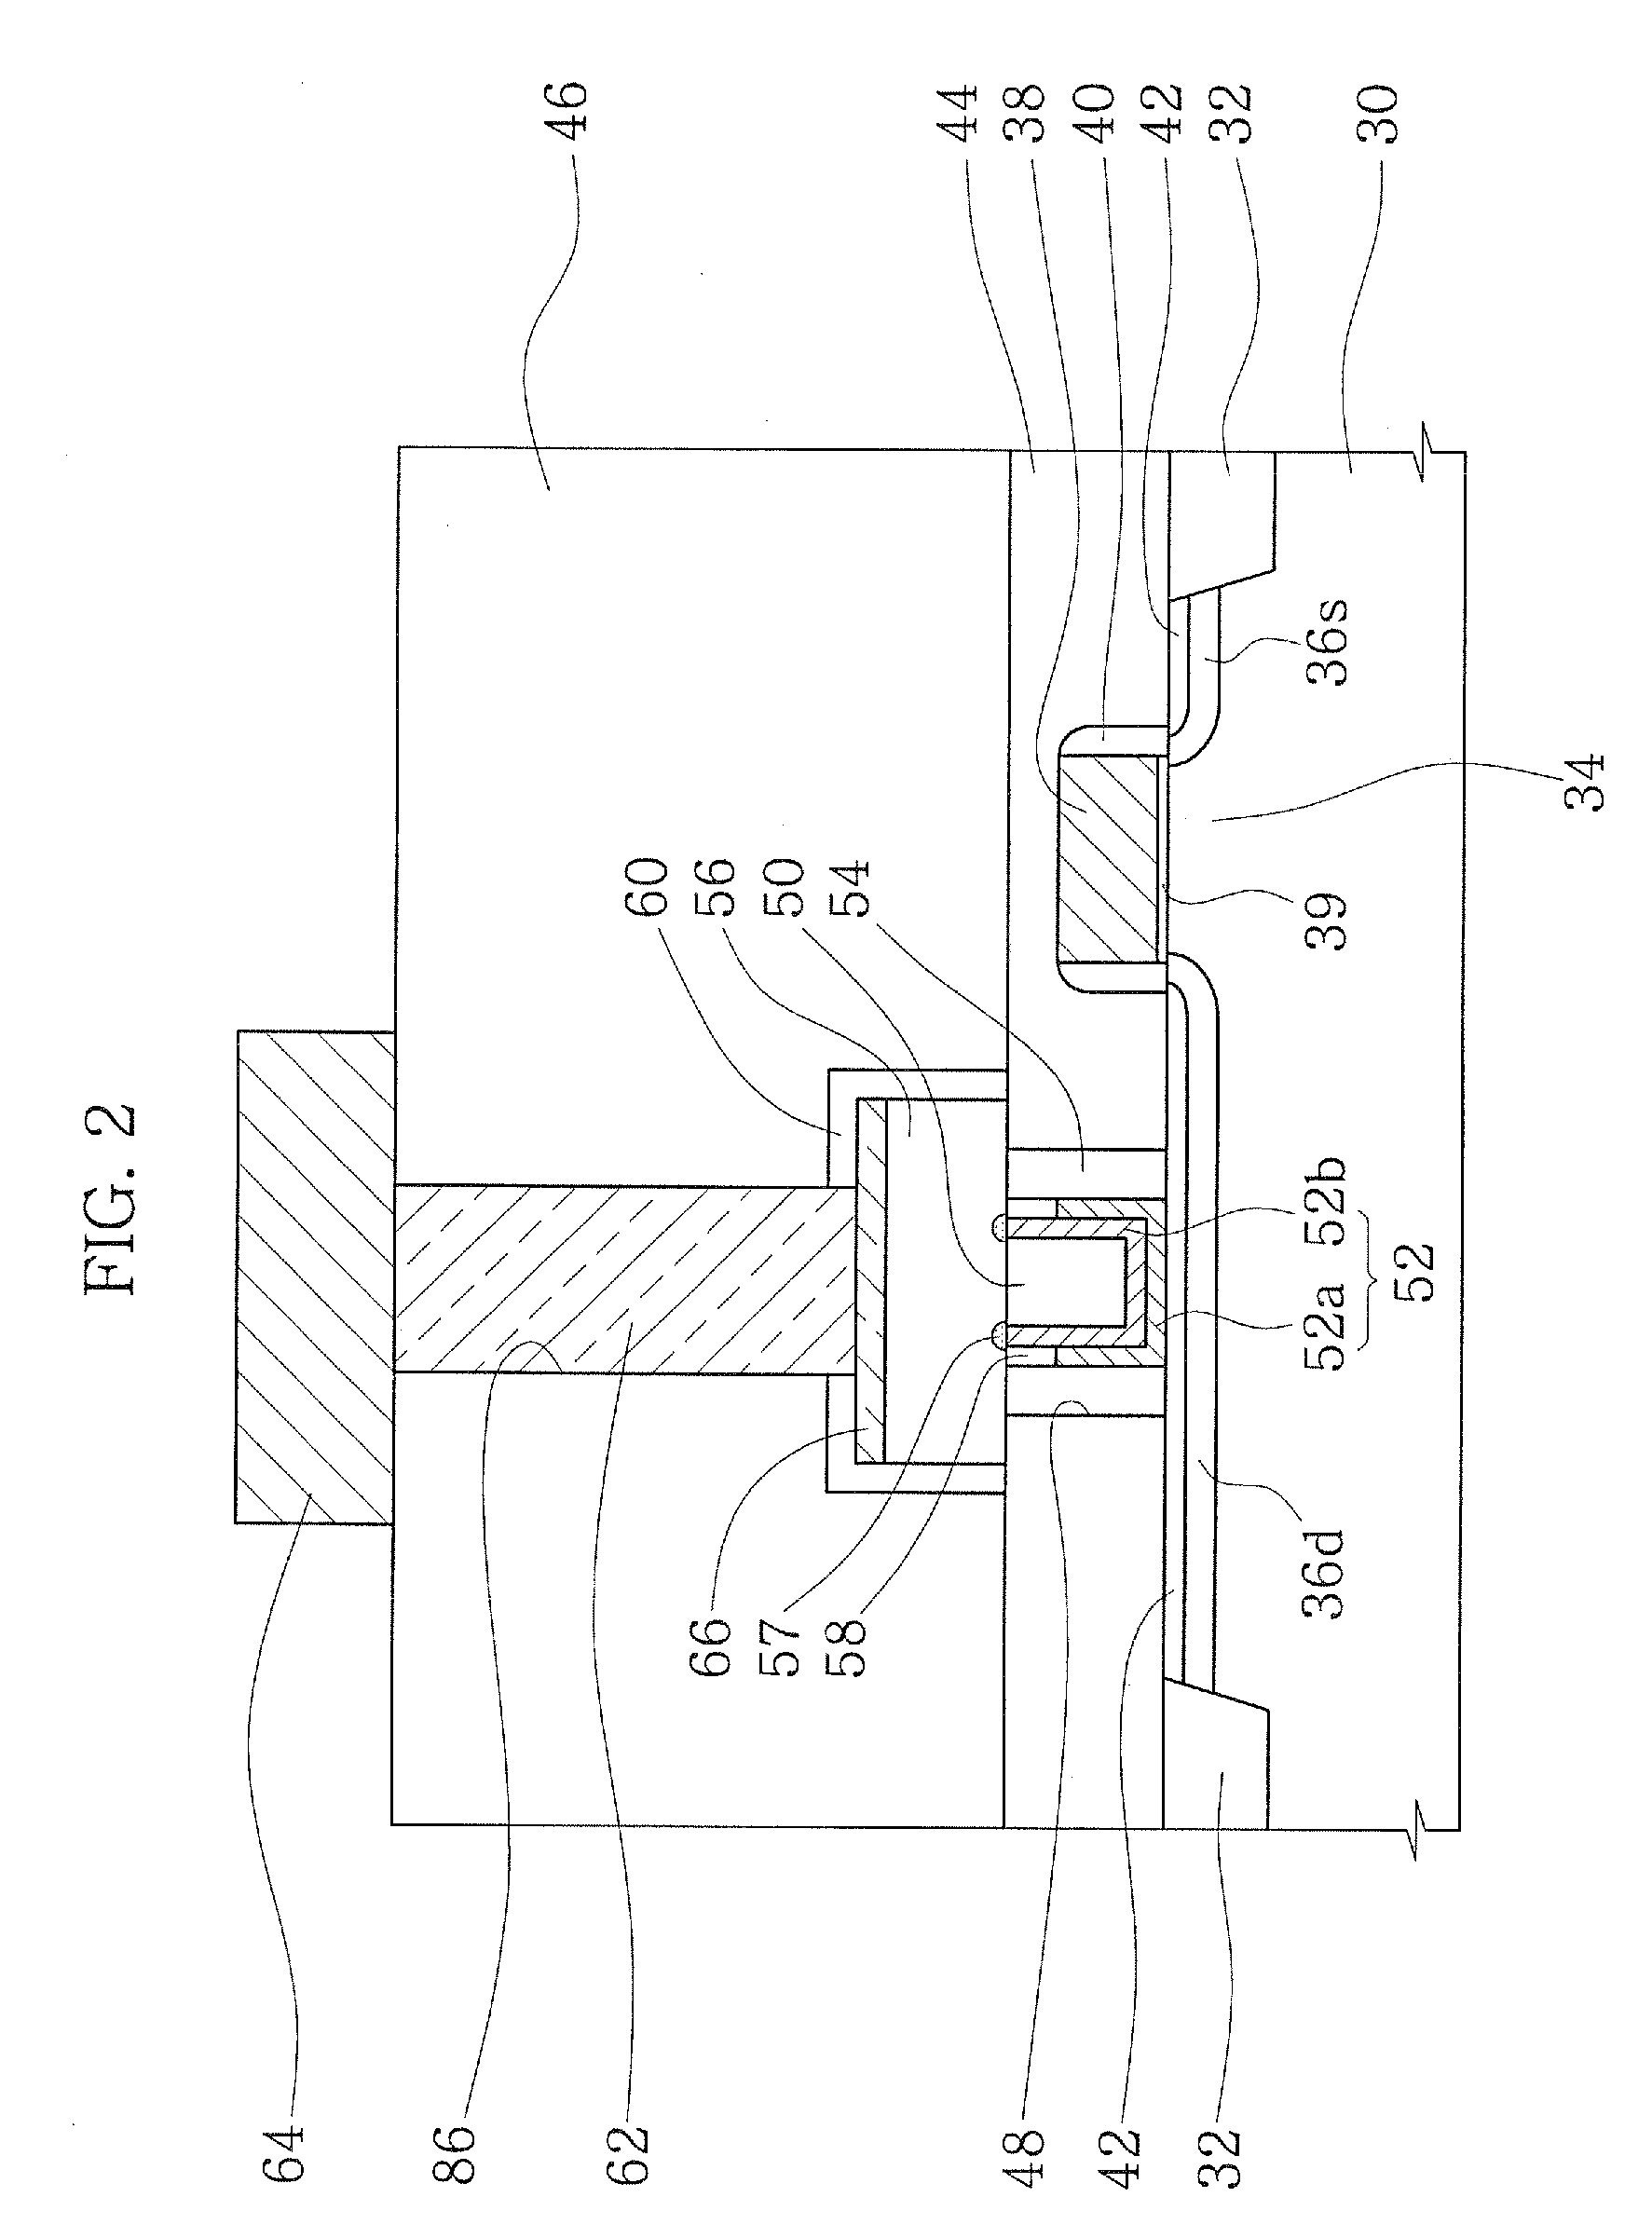 Phase change memory devices having dual lower electrodes and methods of fabricating the same